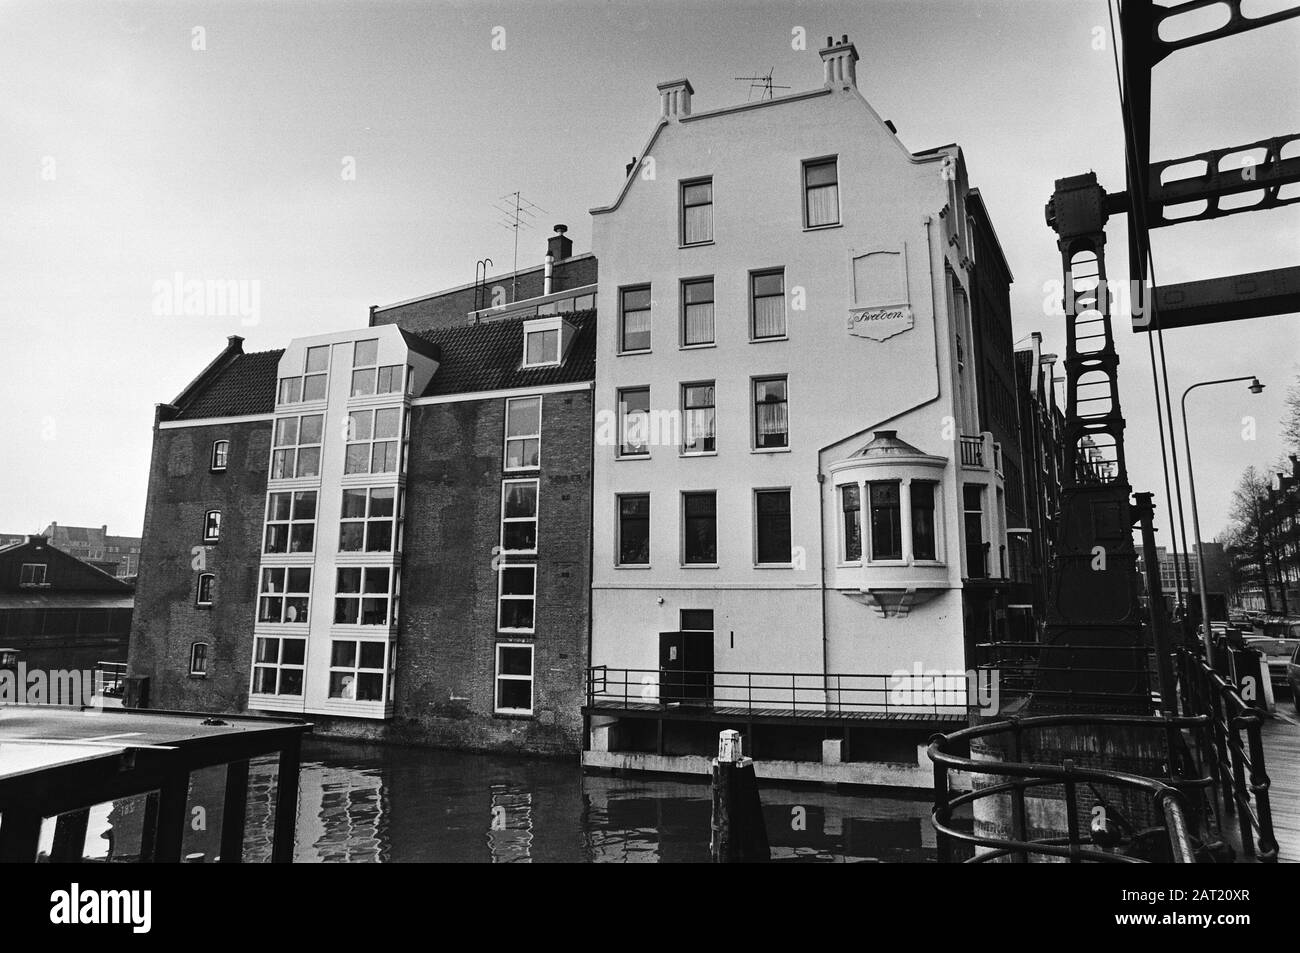 Contract renovation and maintenance student house Uylenburg  Exterior Date: 27 april 1979 Location: Amsterdam, Noord-Holland Keywords: buildings, renovations, student housing Stock Photo